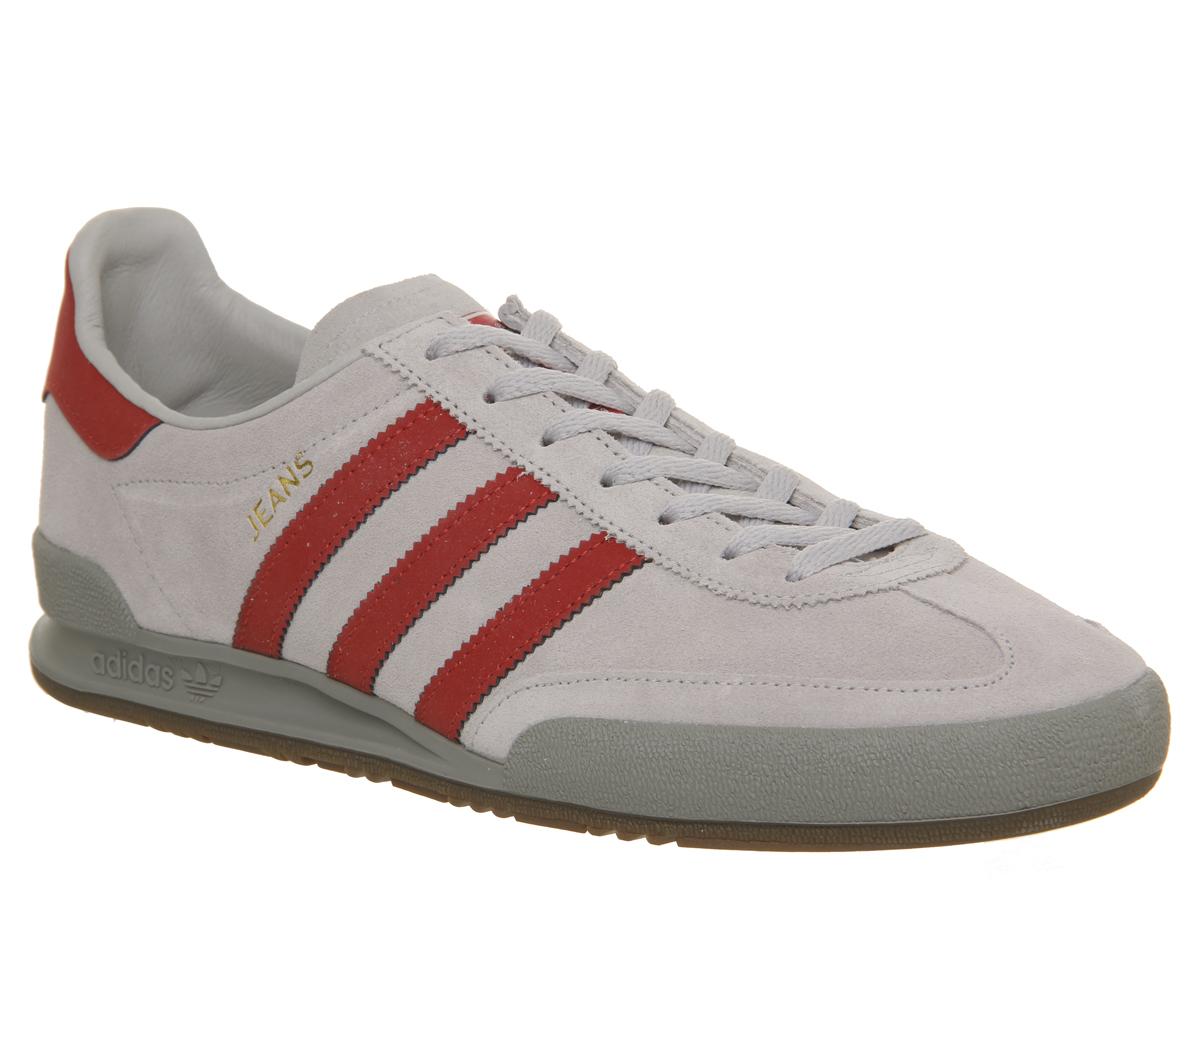 adidas jeans trainers grey and red